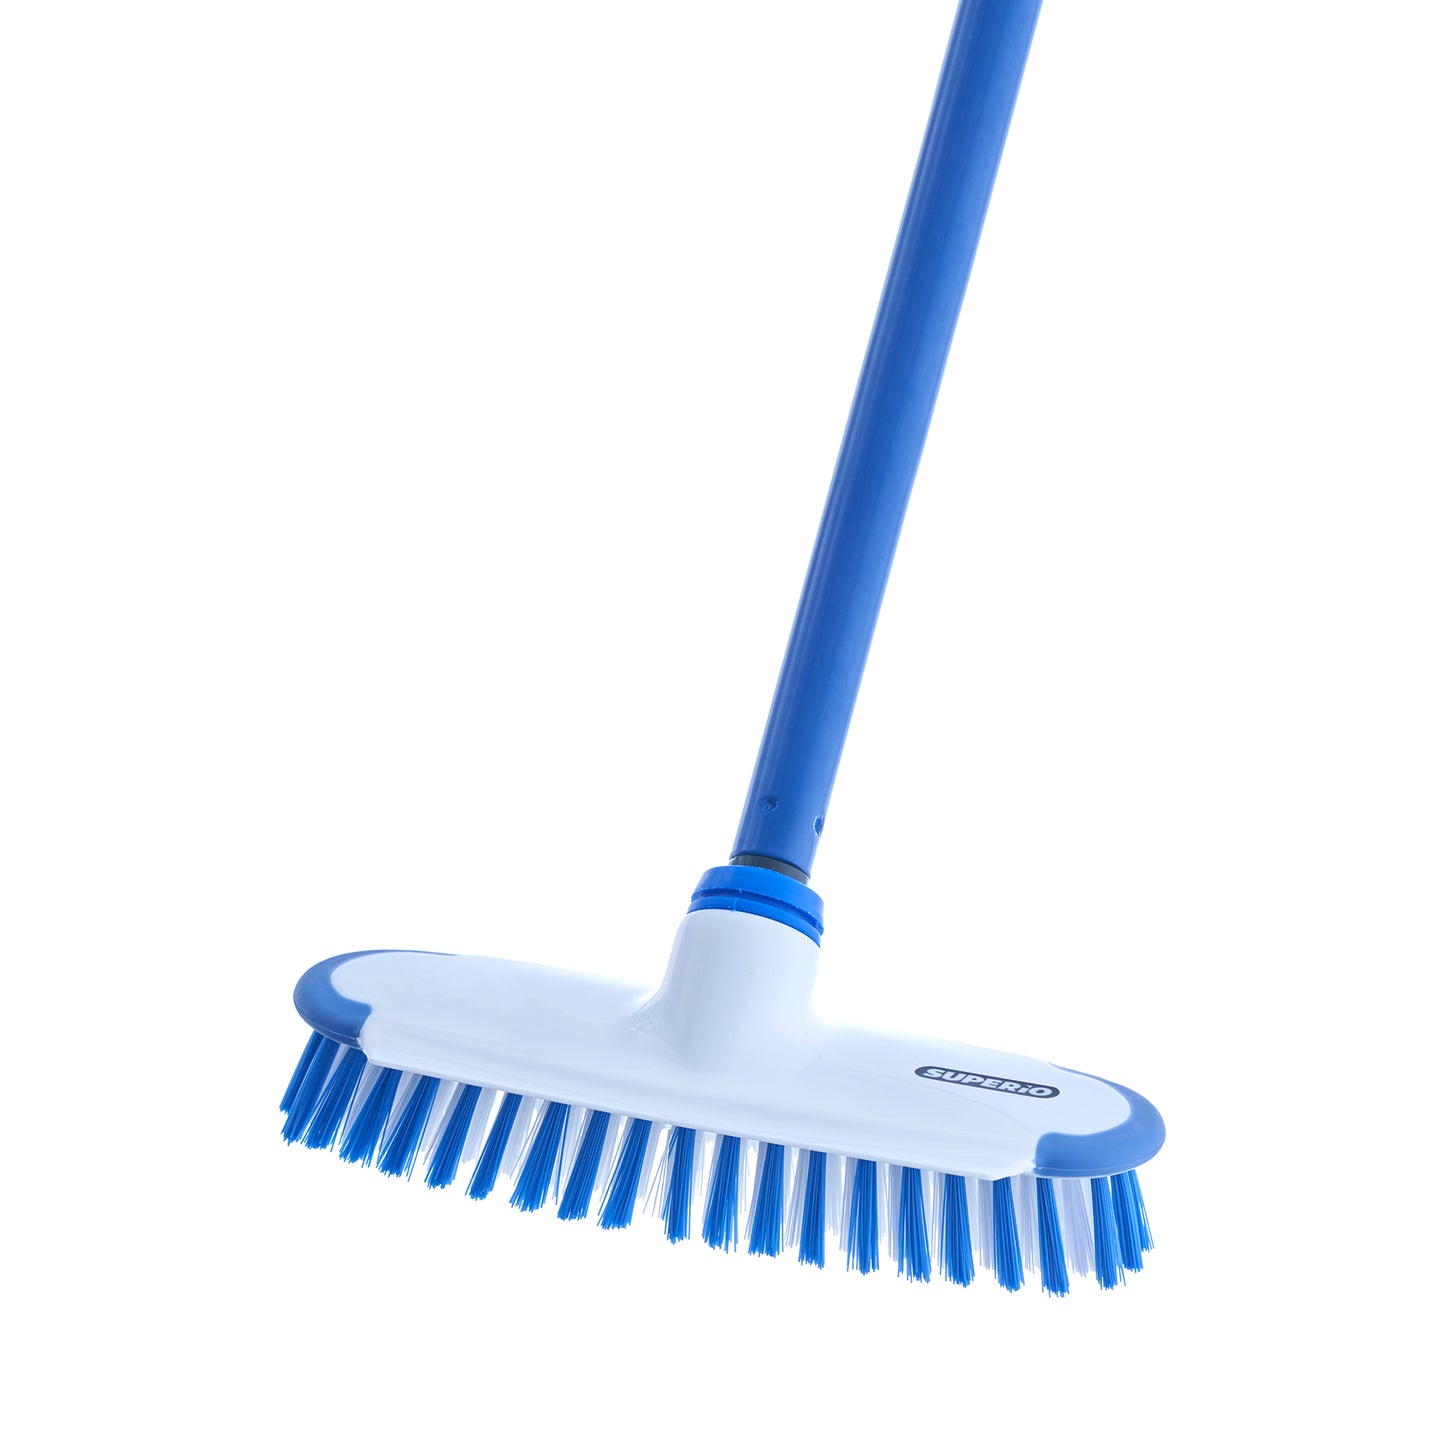 Heavy Duty Jobsite Deck Scrub Brush For Tough Cleaning Jobs At